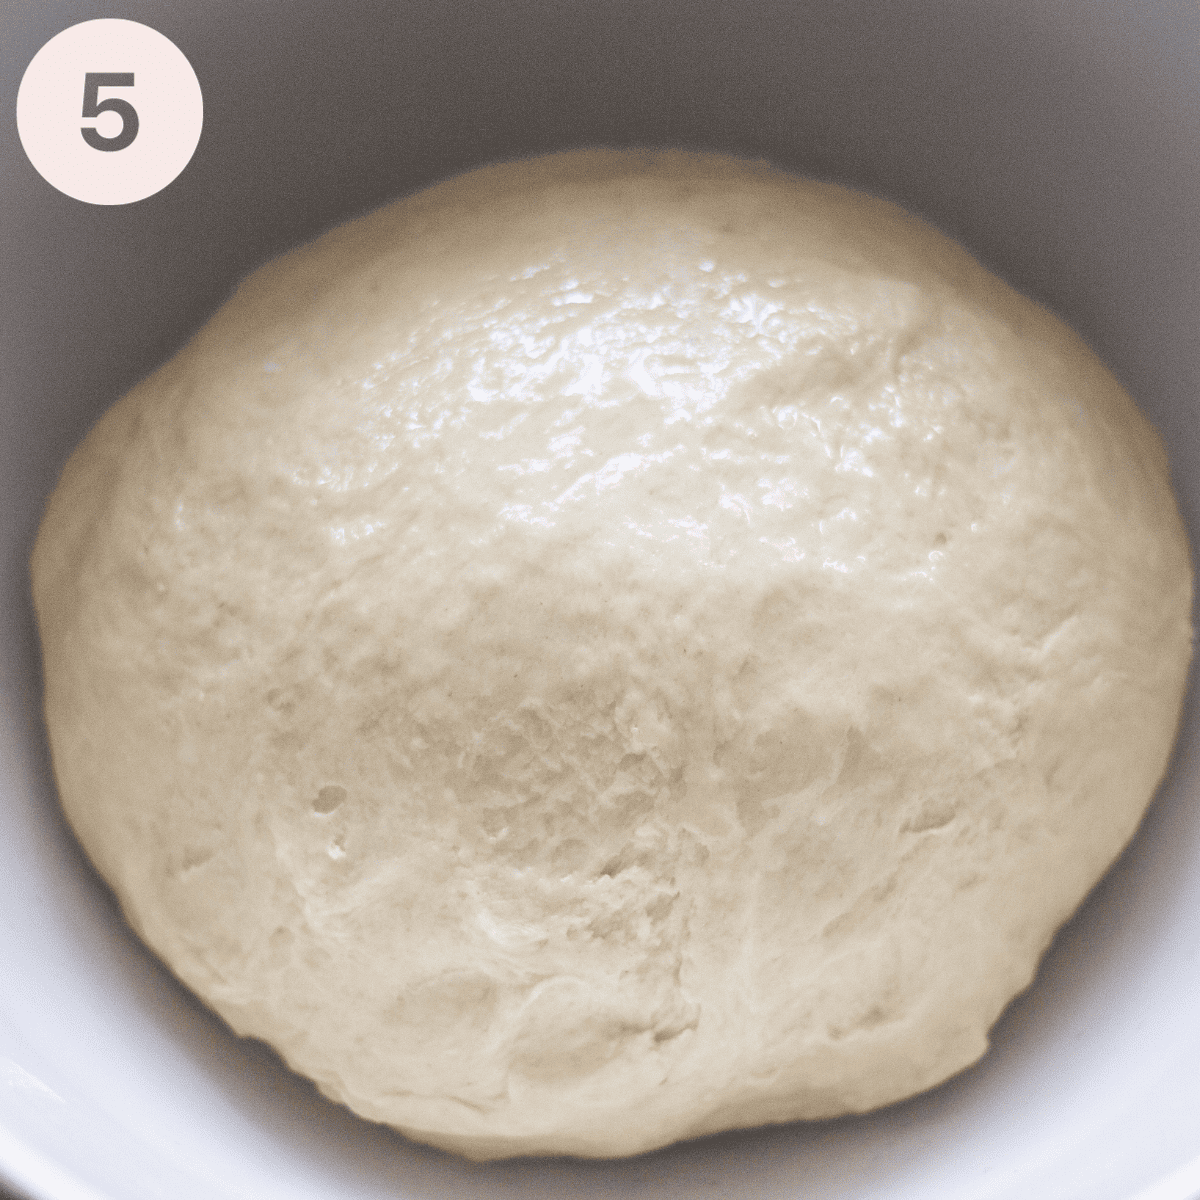 The dough being left to rise.